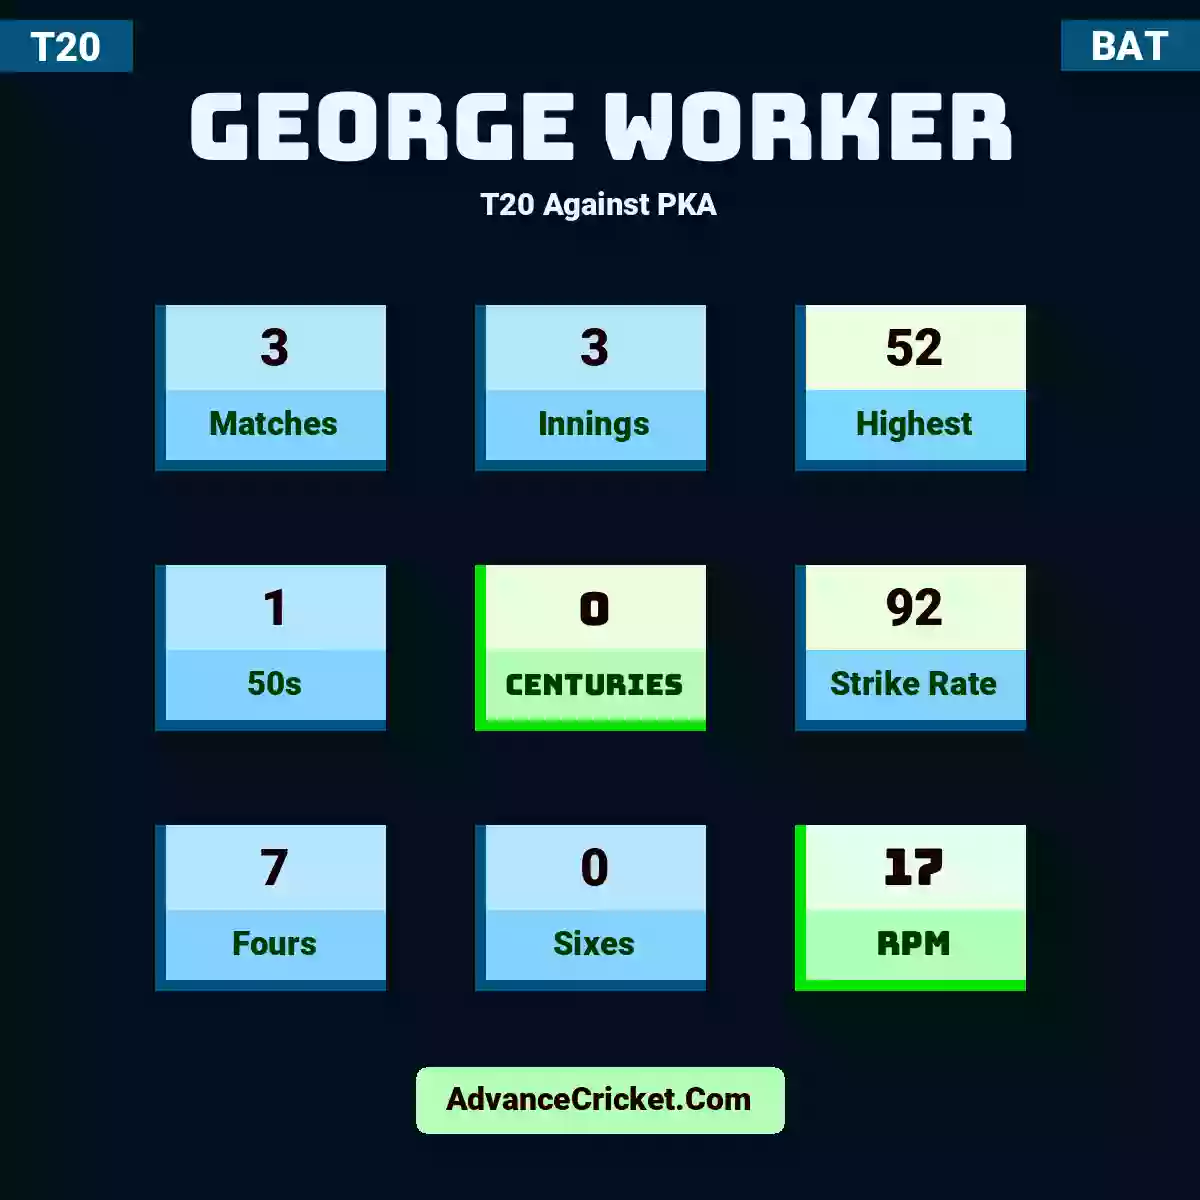 George Worker T20  Against PKA, George Worker played 3 matches, scored 52 runs as highest, 1 half-centuries, and 0 centuries, with a strike rate of 92. G.Worker hit 7 fours and 0 sixes, with an RPM of 17.